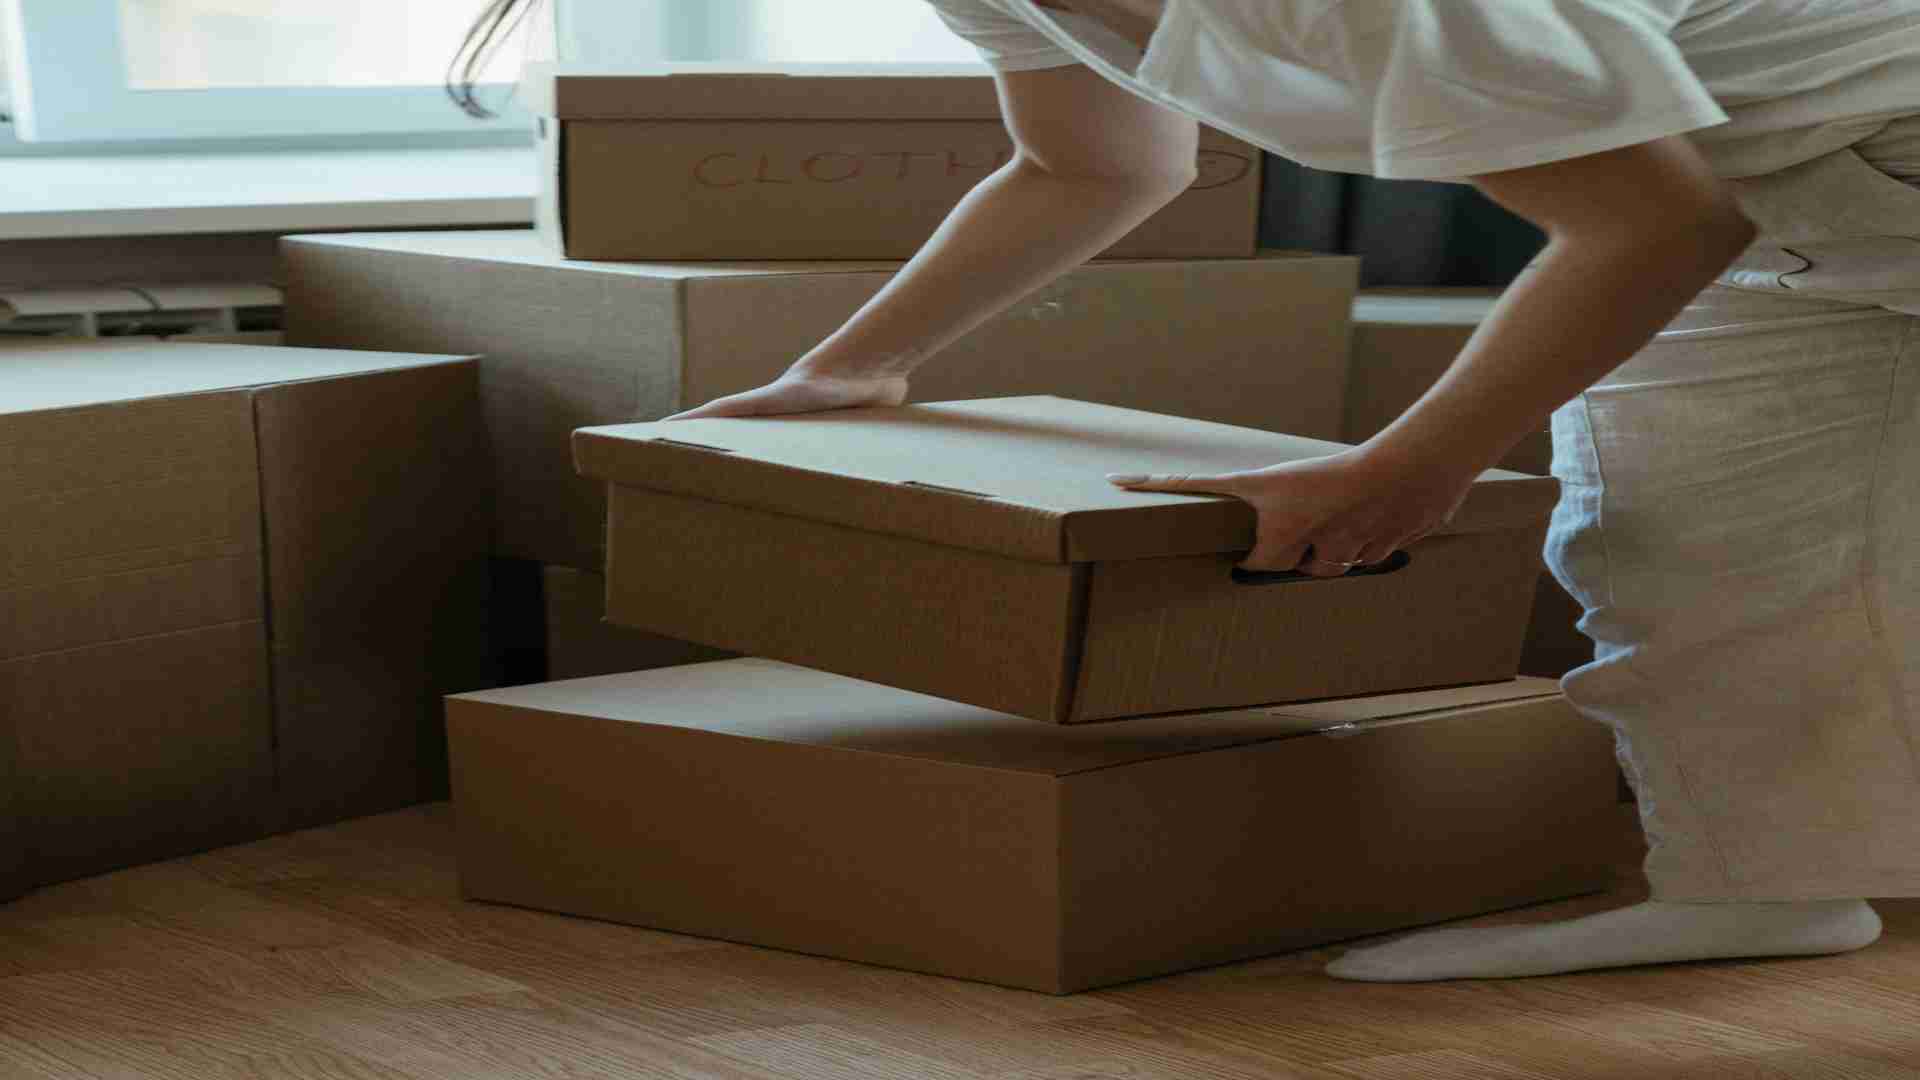 Power of Packers and Movers apps in India